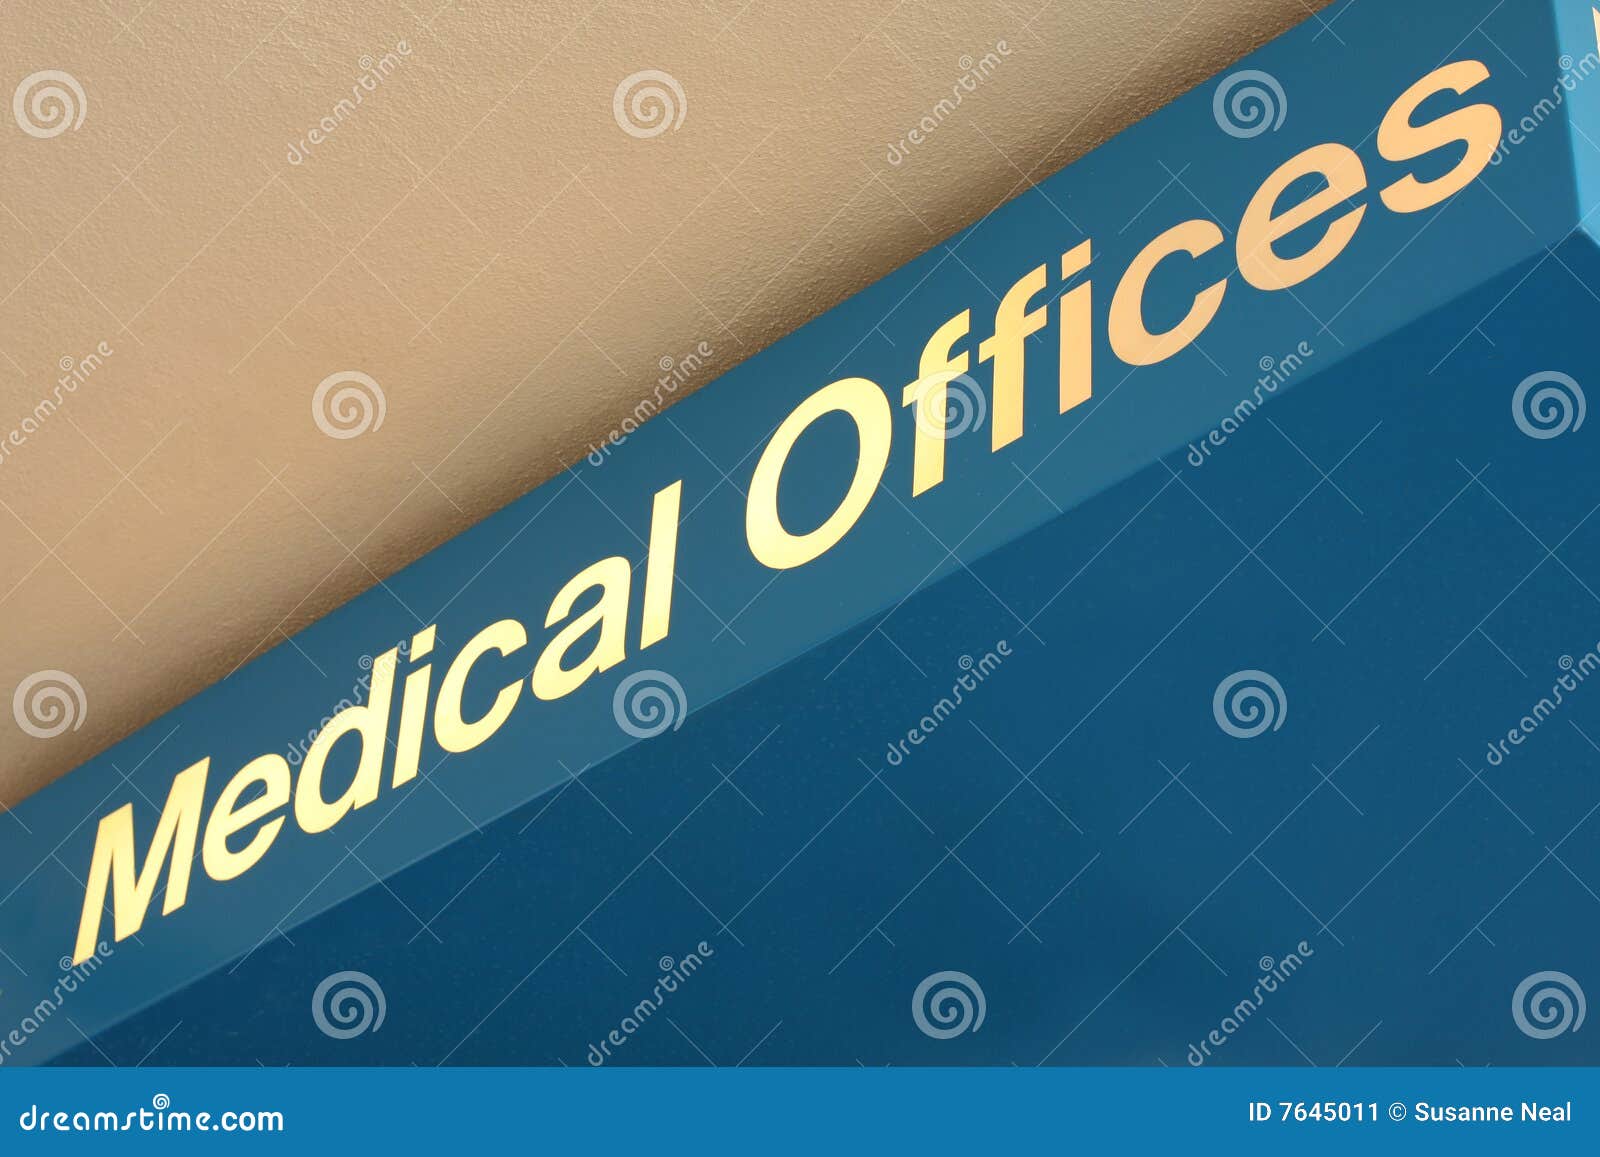 medical offices sign